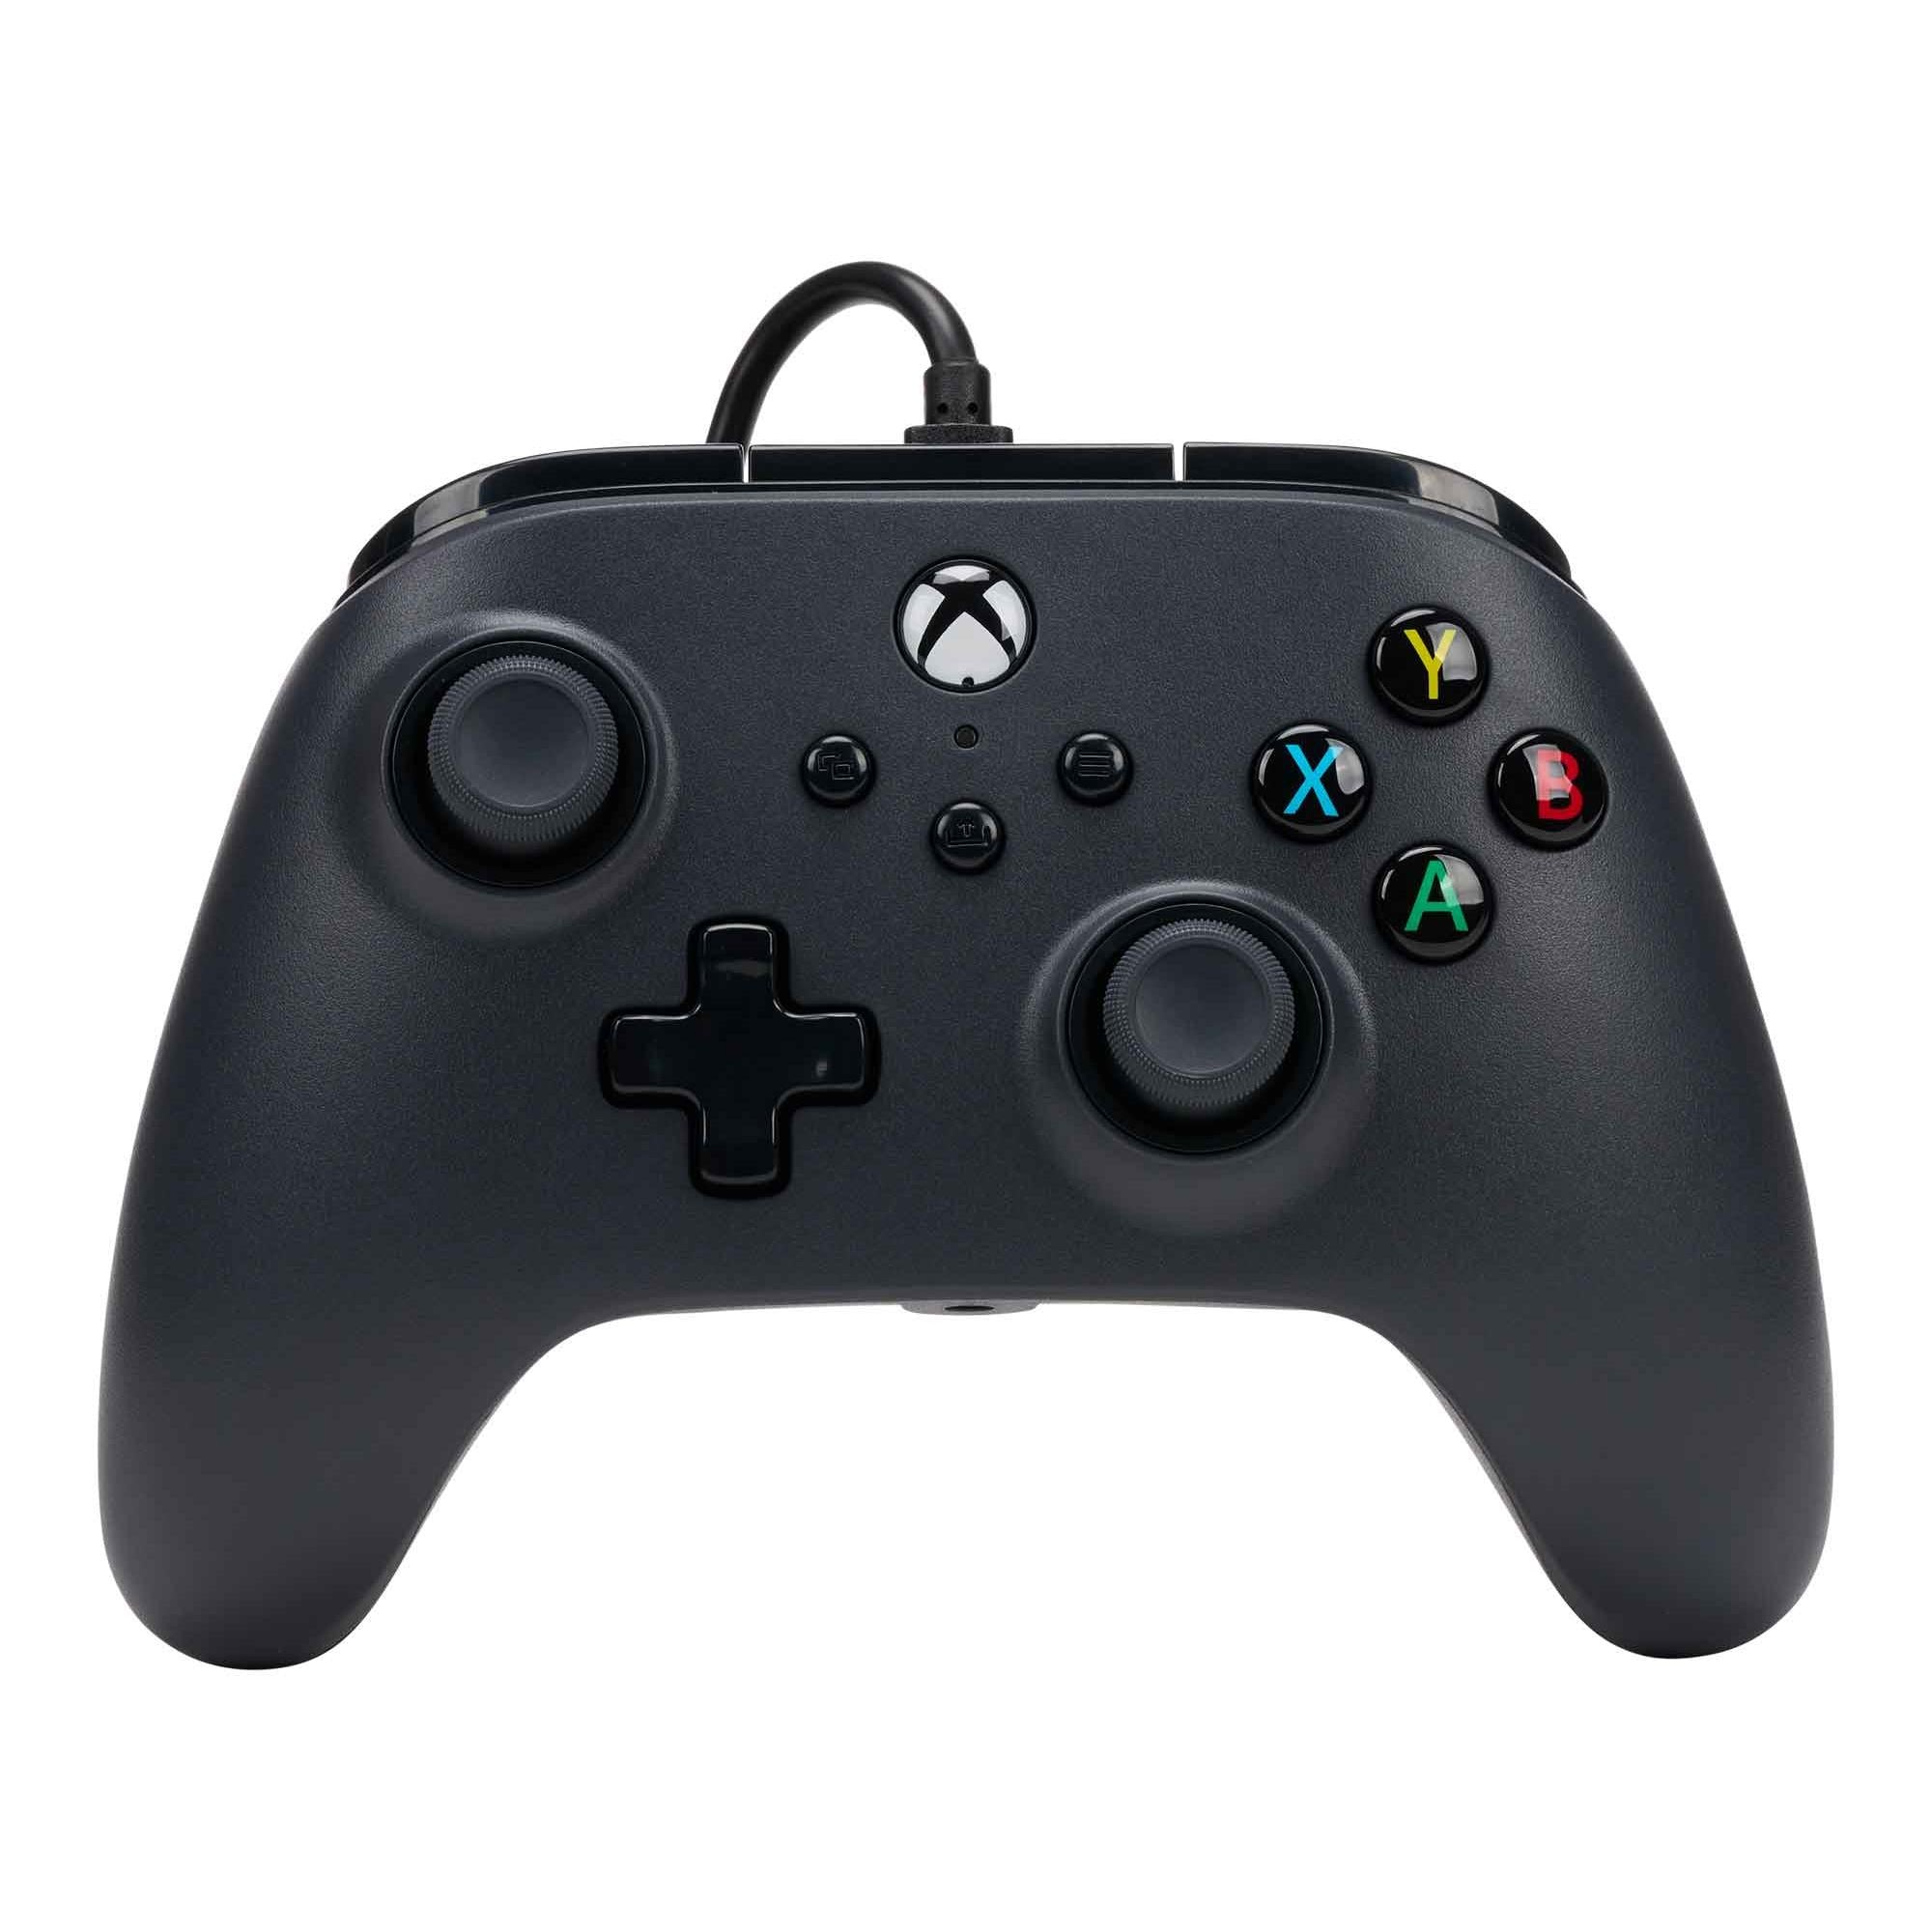 powera wired controller for xbox series x/s (black)